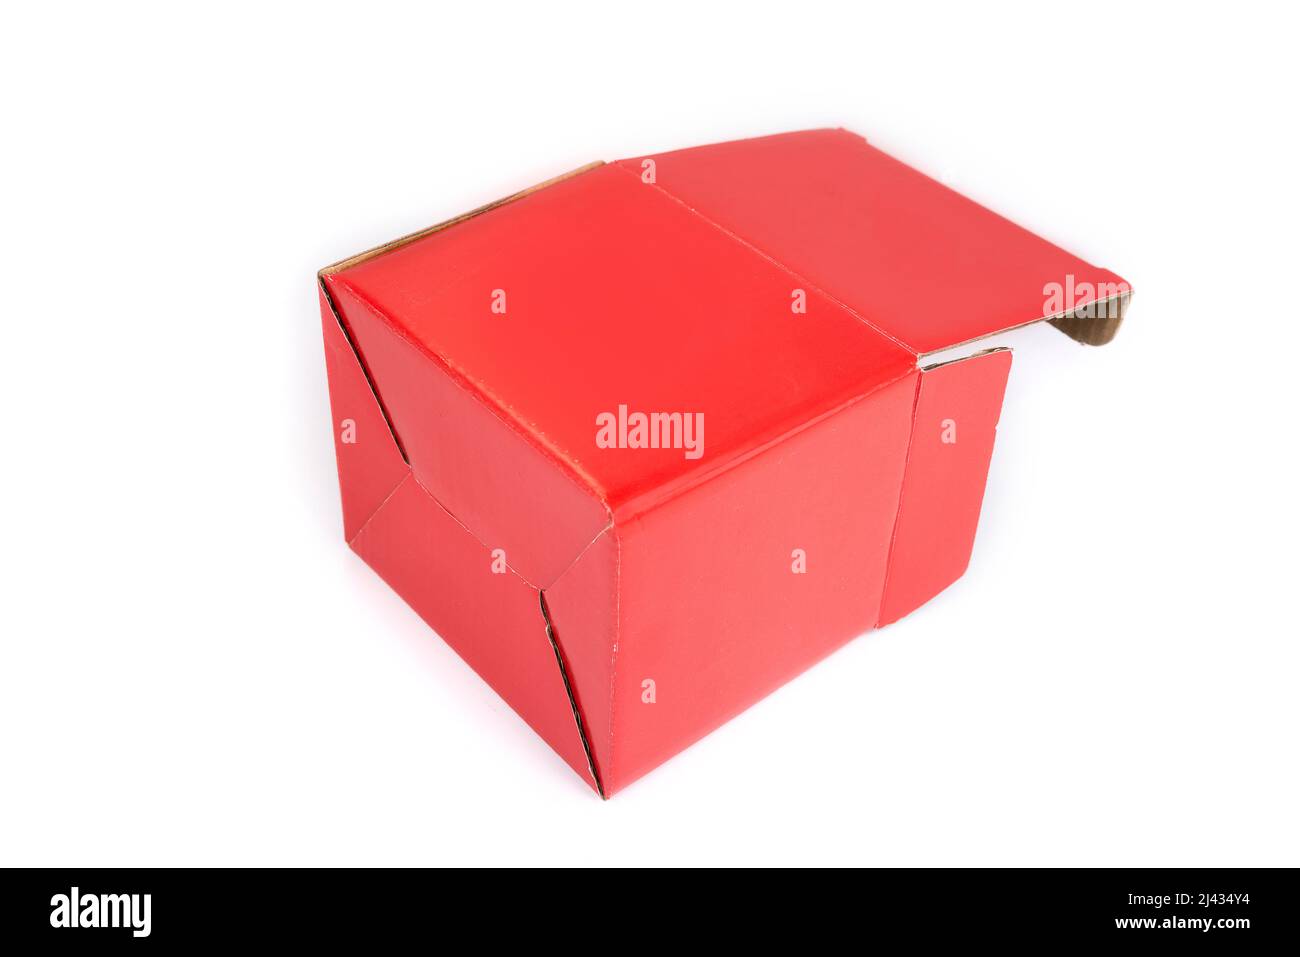 Empty red paper box on a black background Stock Photo